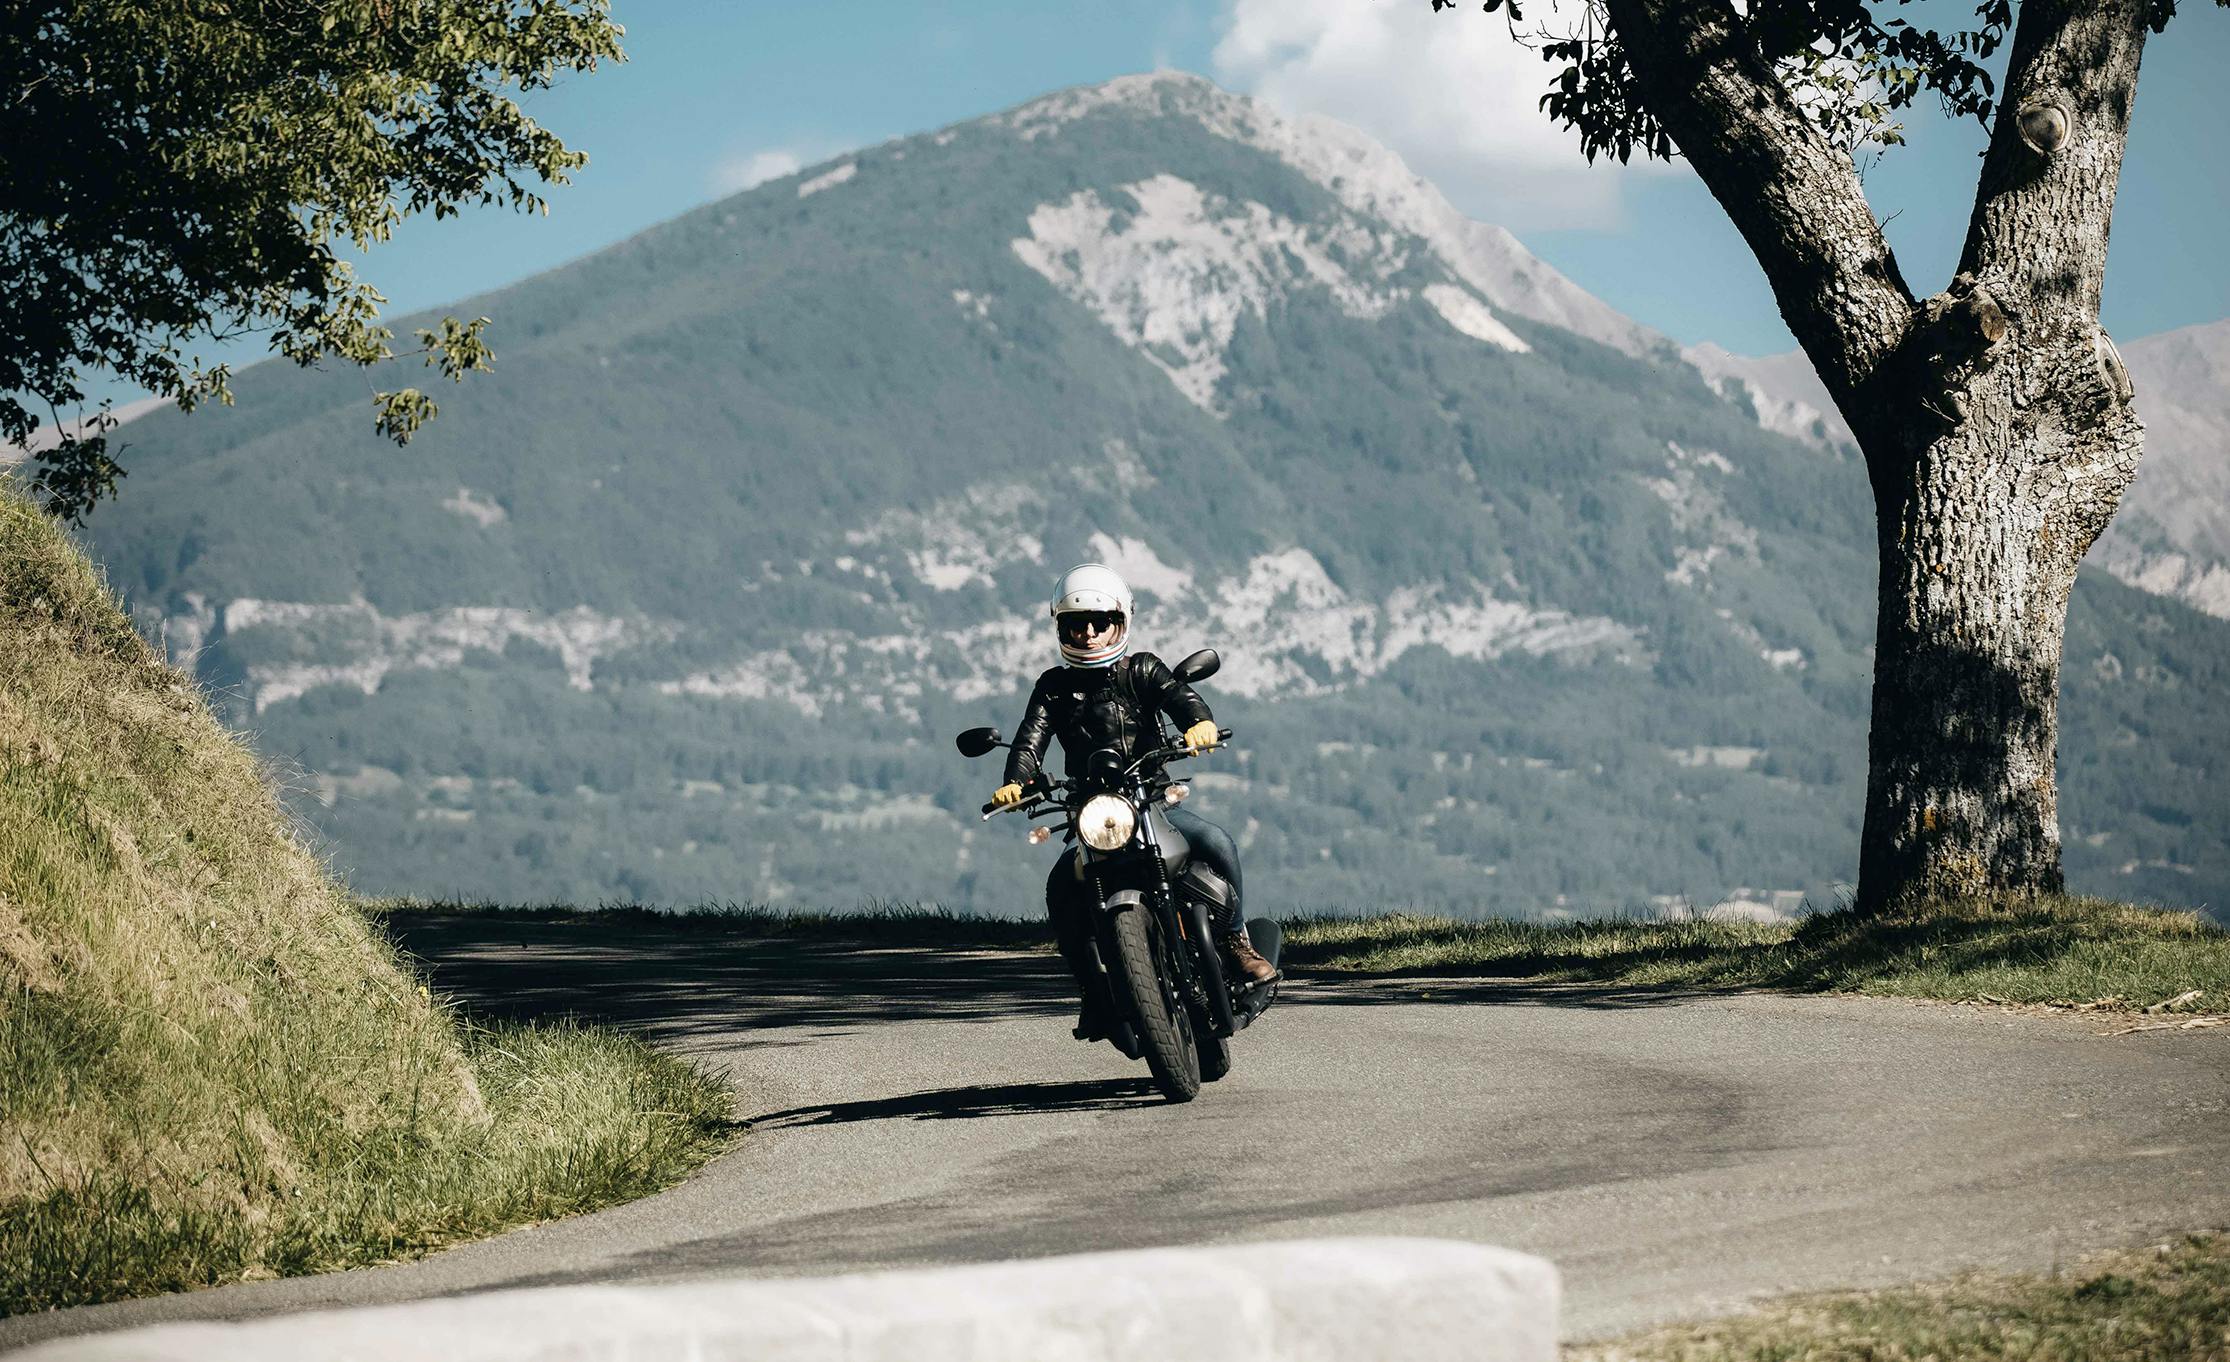 The road to the Alpes Aventure MotoFestival